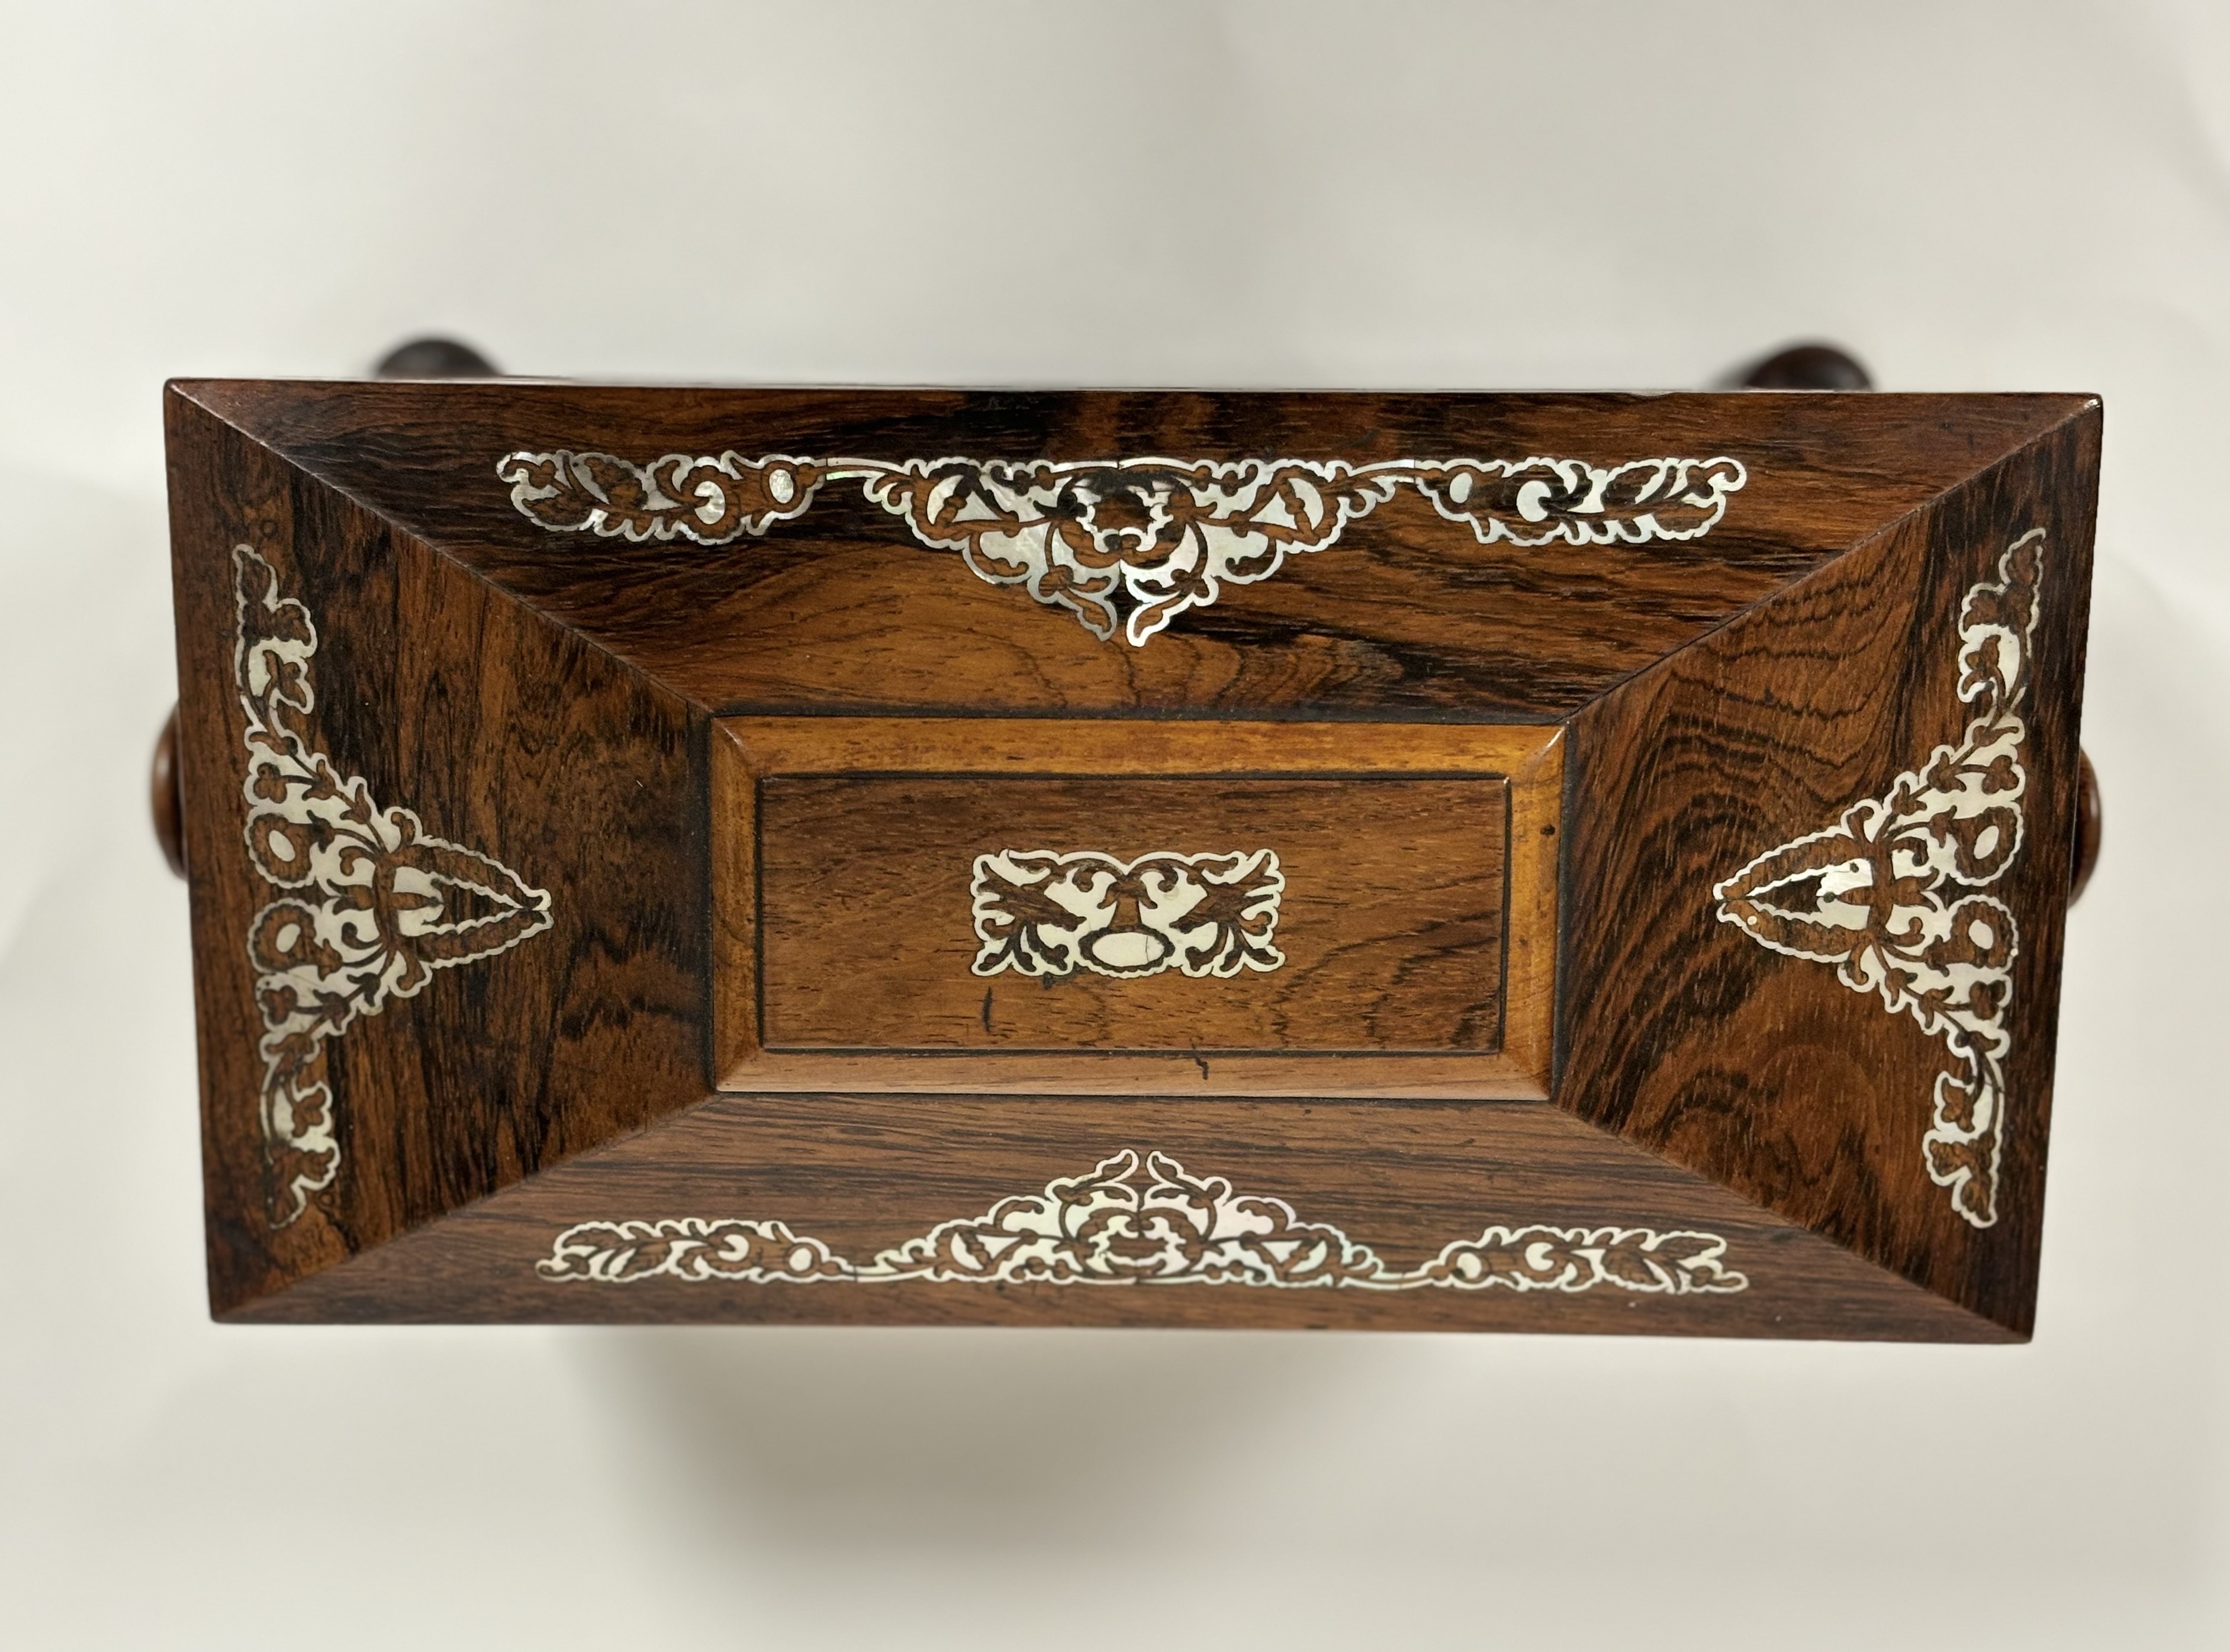 A William IV mother-of-pearl inlaid rosewood tea caddy, of sarcophagus shape, with turned handles - Image 3 of 8